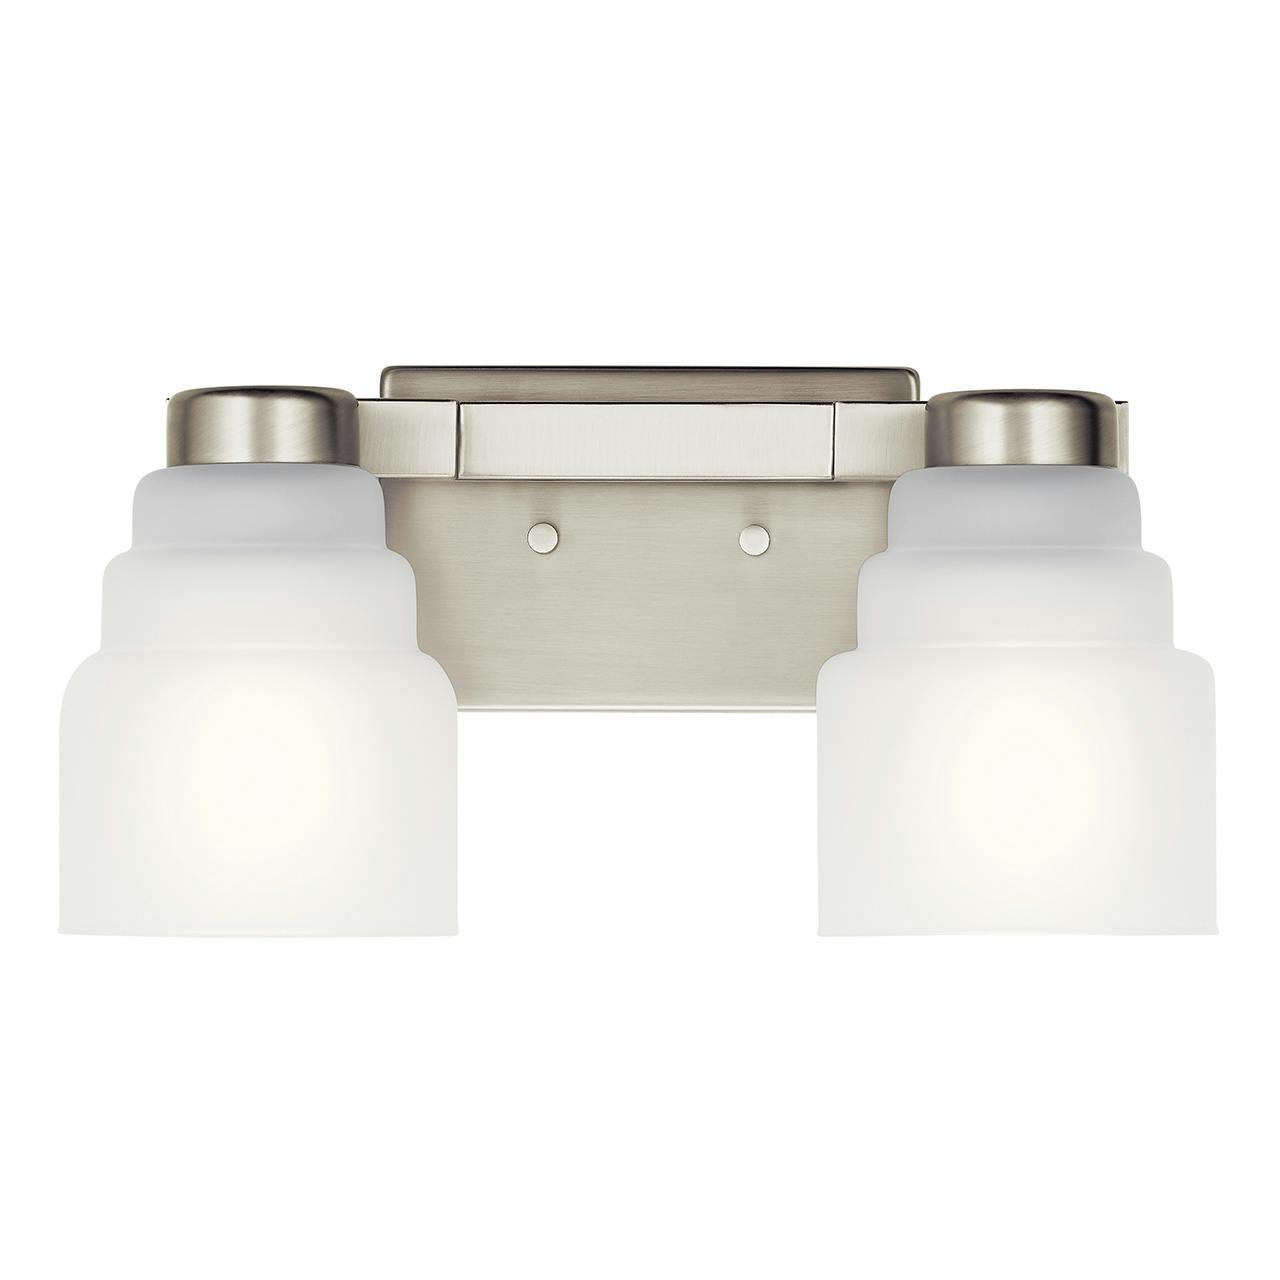 The Vionnet 2 Light Vanity Light Nickel facing down on a white background